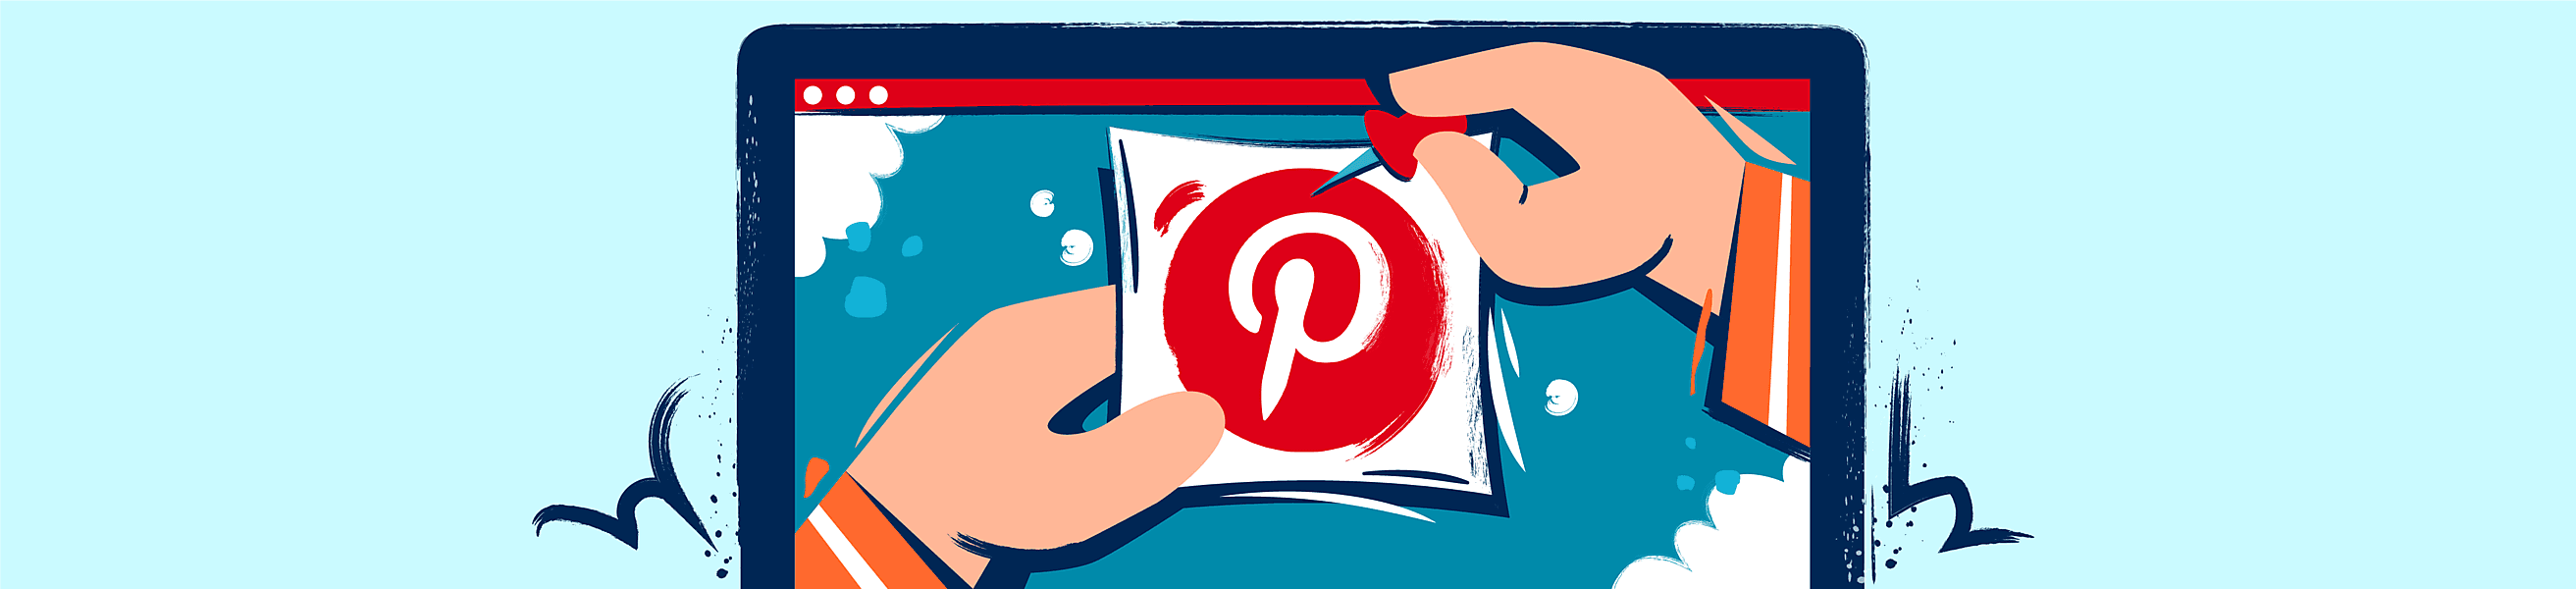 How to Create an App and Website Like Pinterest?